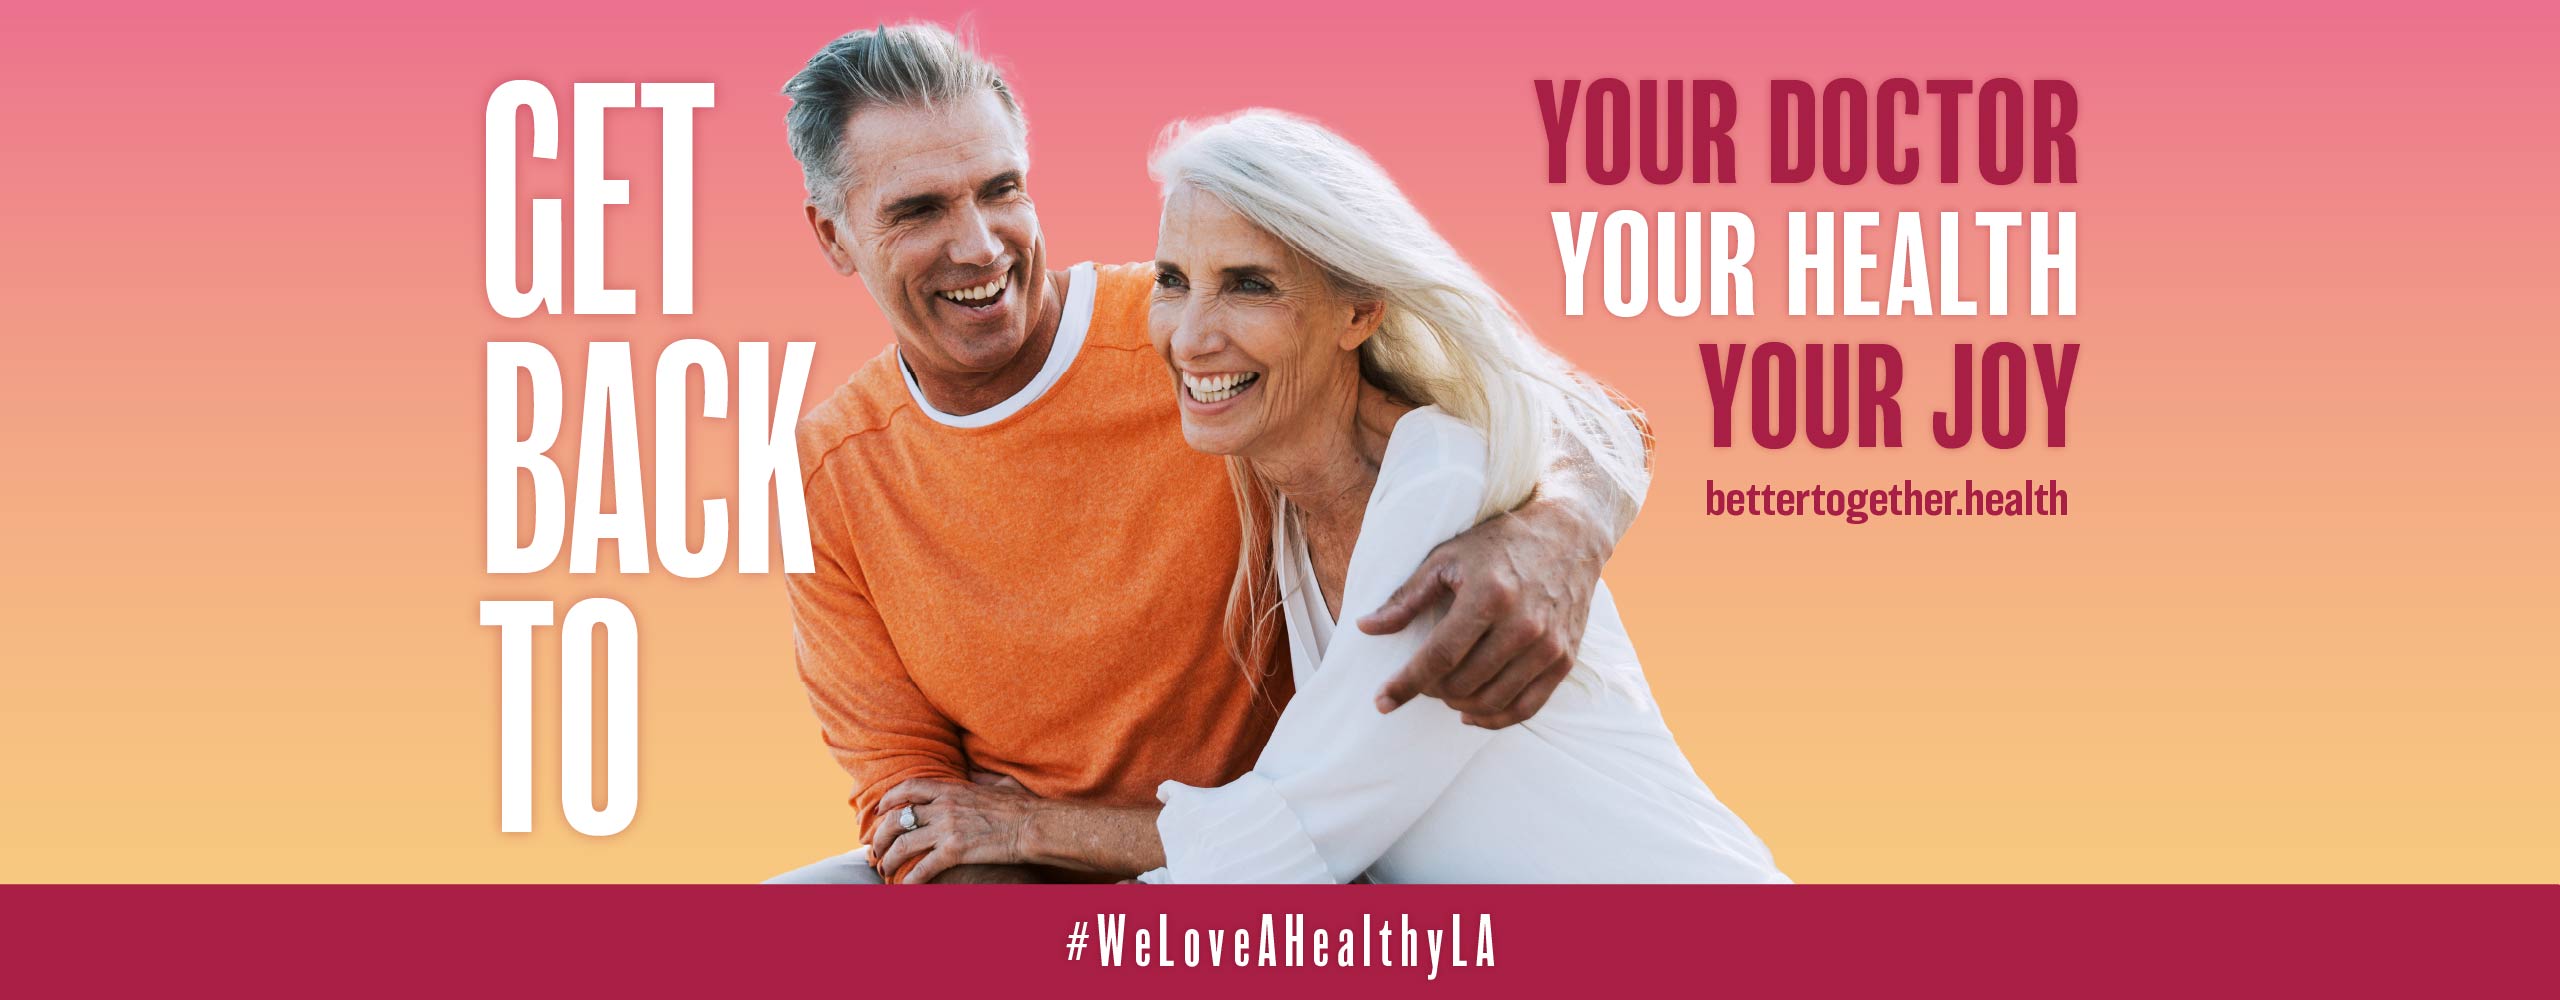 Words: Get Back to your doctor, your health, your joy. Older couple hugging and laughing - #WeLoveAHealthyLA